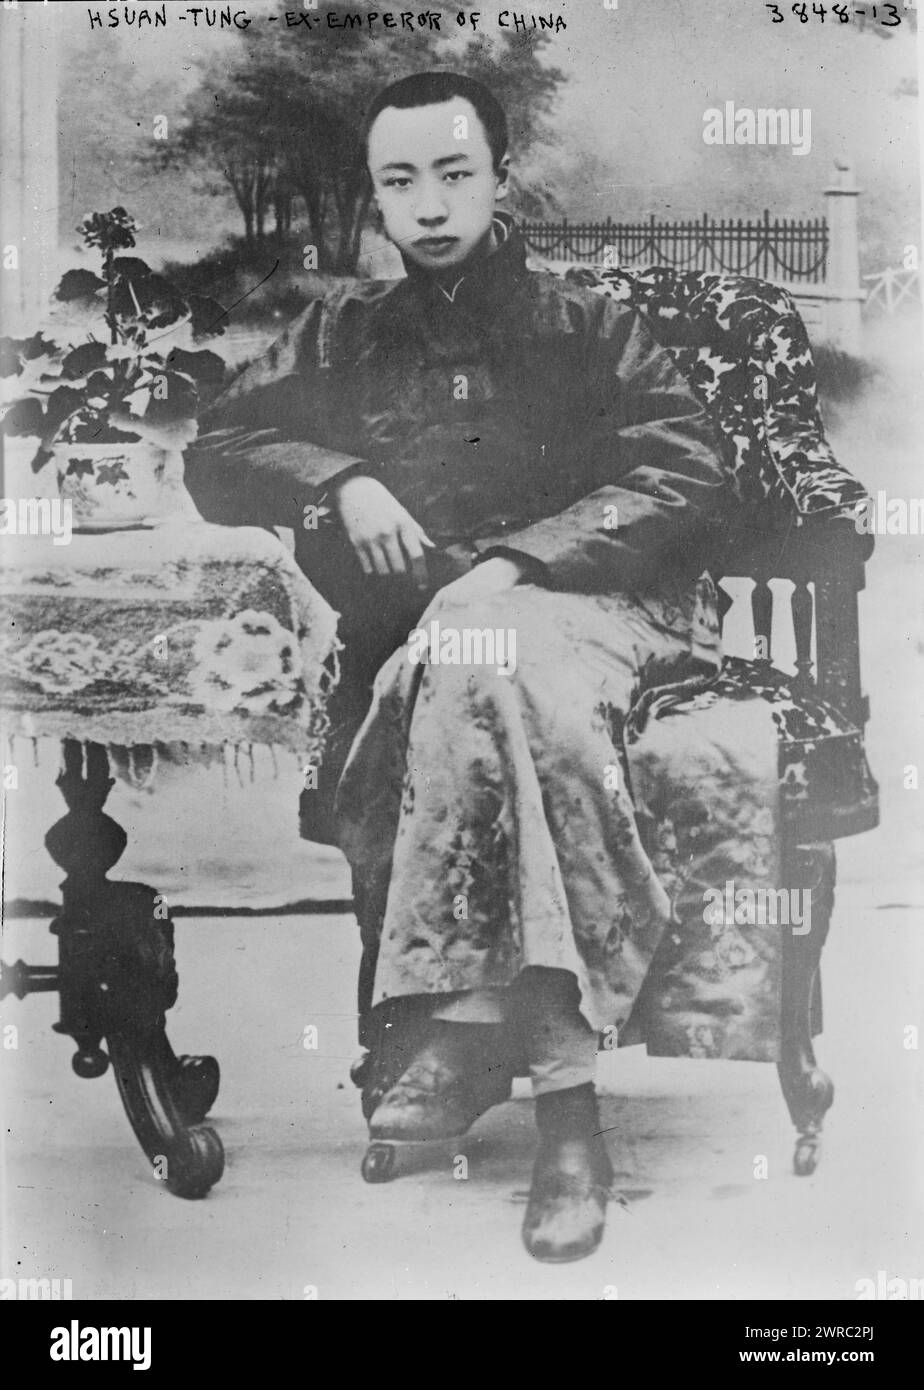 Hsuan-Tung, Ex-Emperor of China, Photograph shows Aisin-Gioro Puyi (1906-1967), known as Puyi, the last Emperor of China who ruled from 1908 until 1912., between ca. 1915 and ca. 1920, Glass negatives, 1 negative: glass Stock Photo